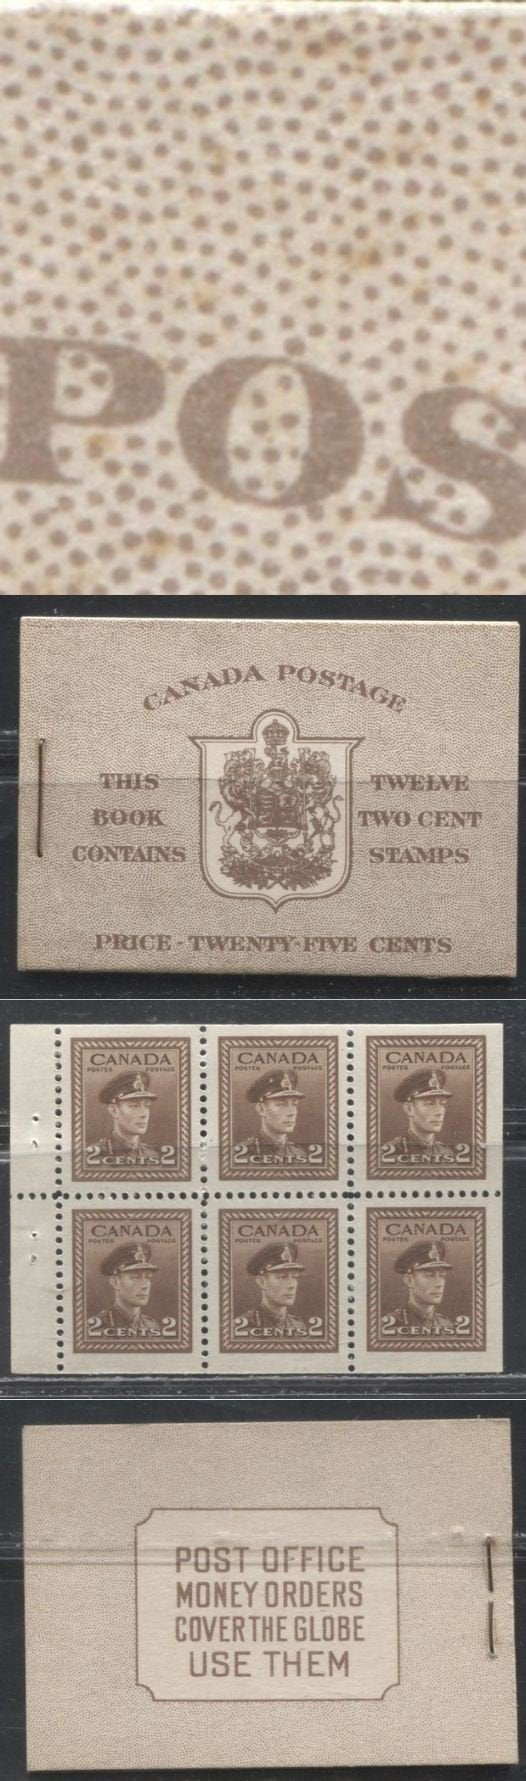 Lot 252 Canada #BK33a 1942-1949 War Issue, Complete 25¢ English Booklet, 2 Panes of 2c Brown, Smooth Vertical Wove Paper, Dark Brown Harris Front Cover Type IId, 6c Airmail Rate Page